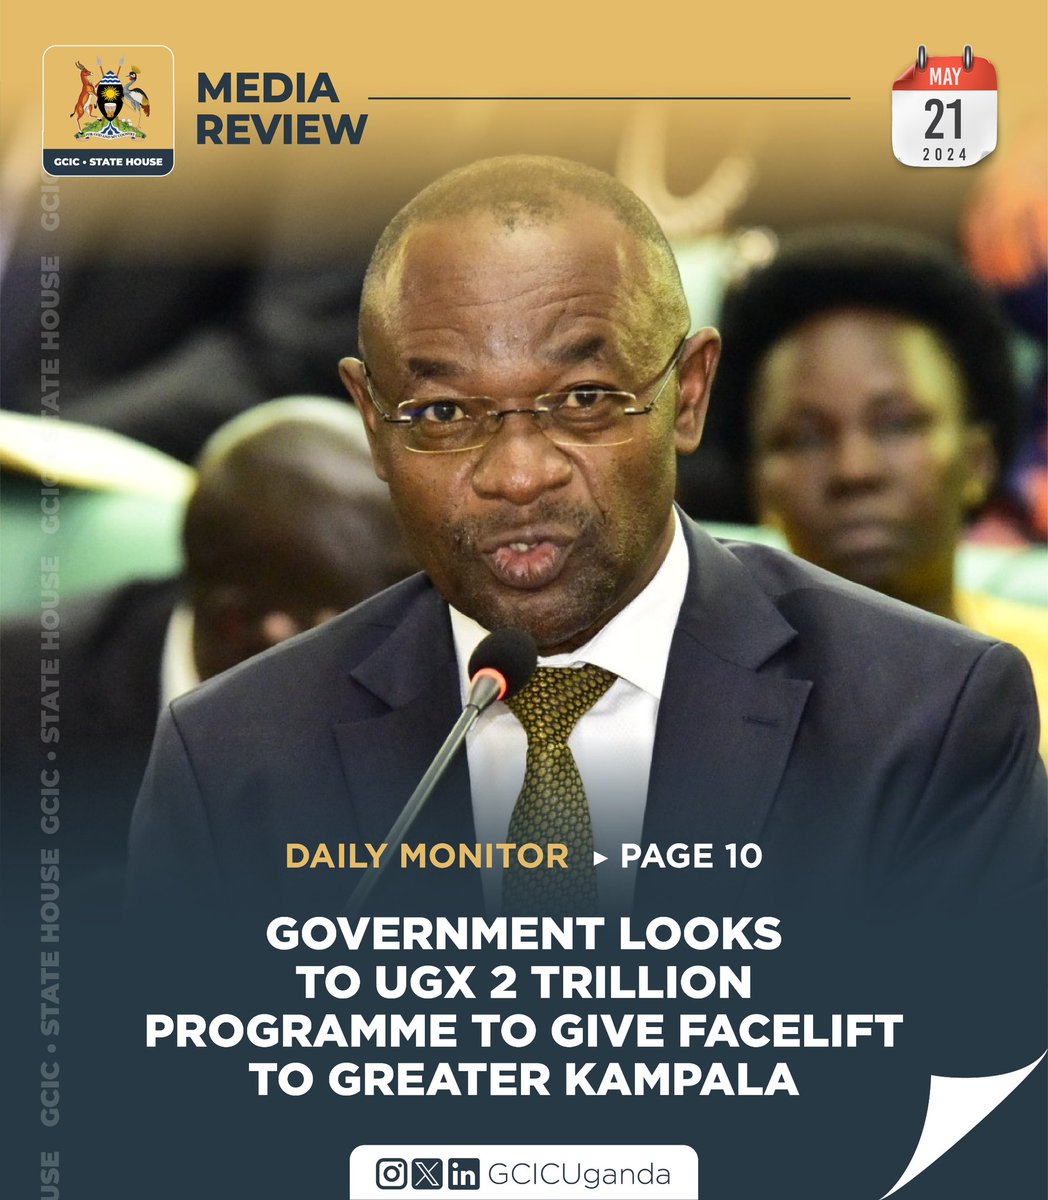 Today’s top stories; 📌 @GovUganda outlines new anti-fraud measures- land 📌 @MODVA_UPDF to recruit 9,600 youth 📌 @GovUganda launches construction of 103km Koboko-Yumbe - Moyo road 📌 @GovUganda looks to UGX 2 trillion programme to give facelift to greater Kampala